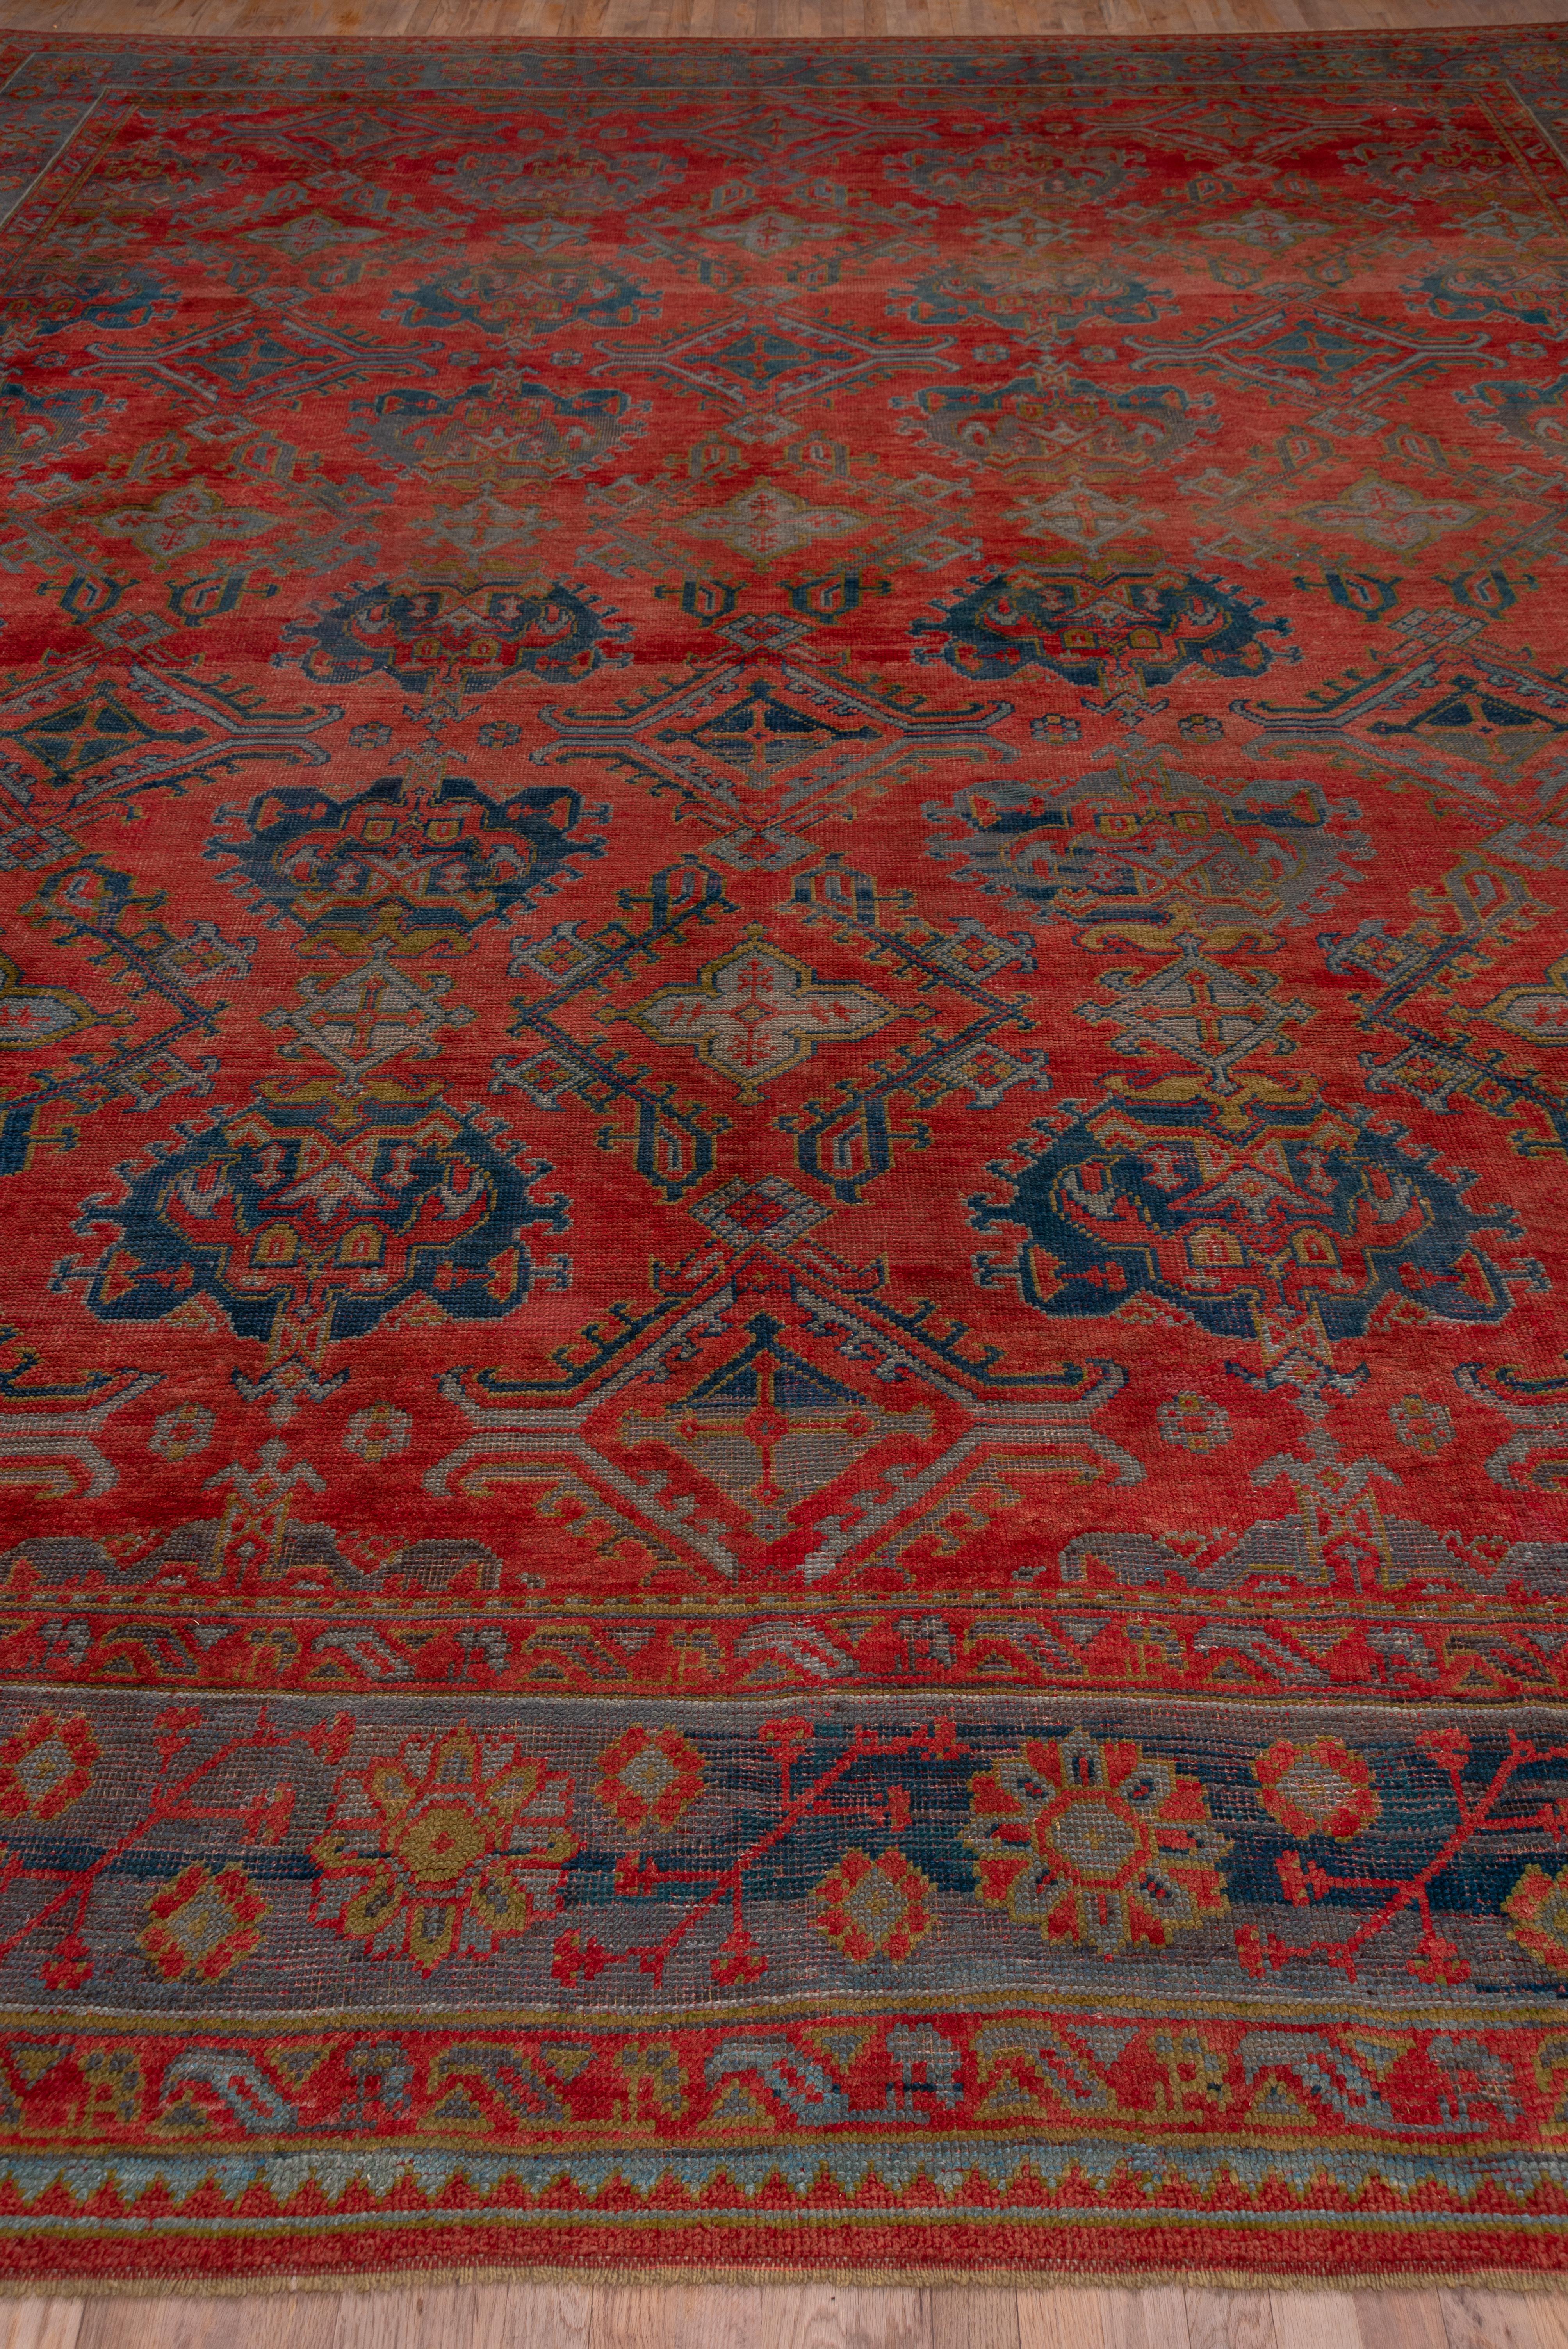 The abrashed soft madder red field of this western Turkish workshop carpet displays an all-over yaprak (